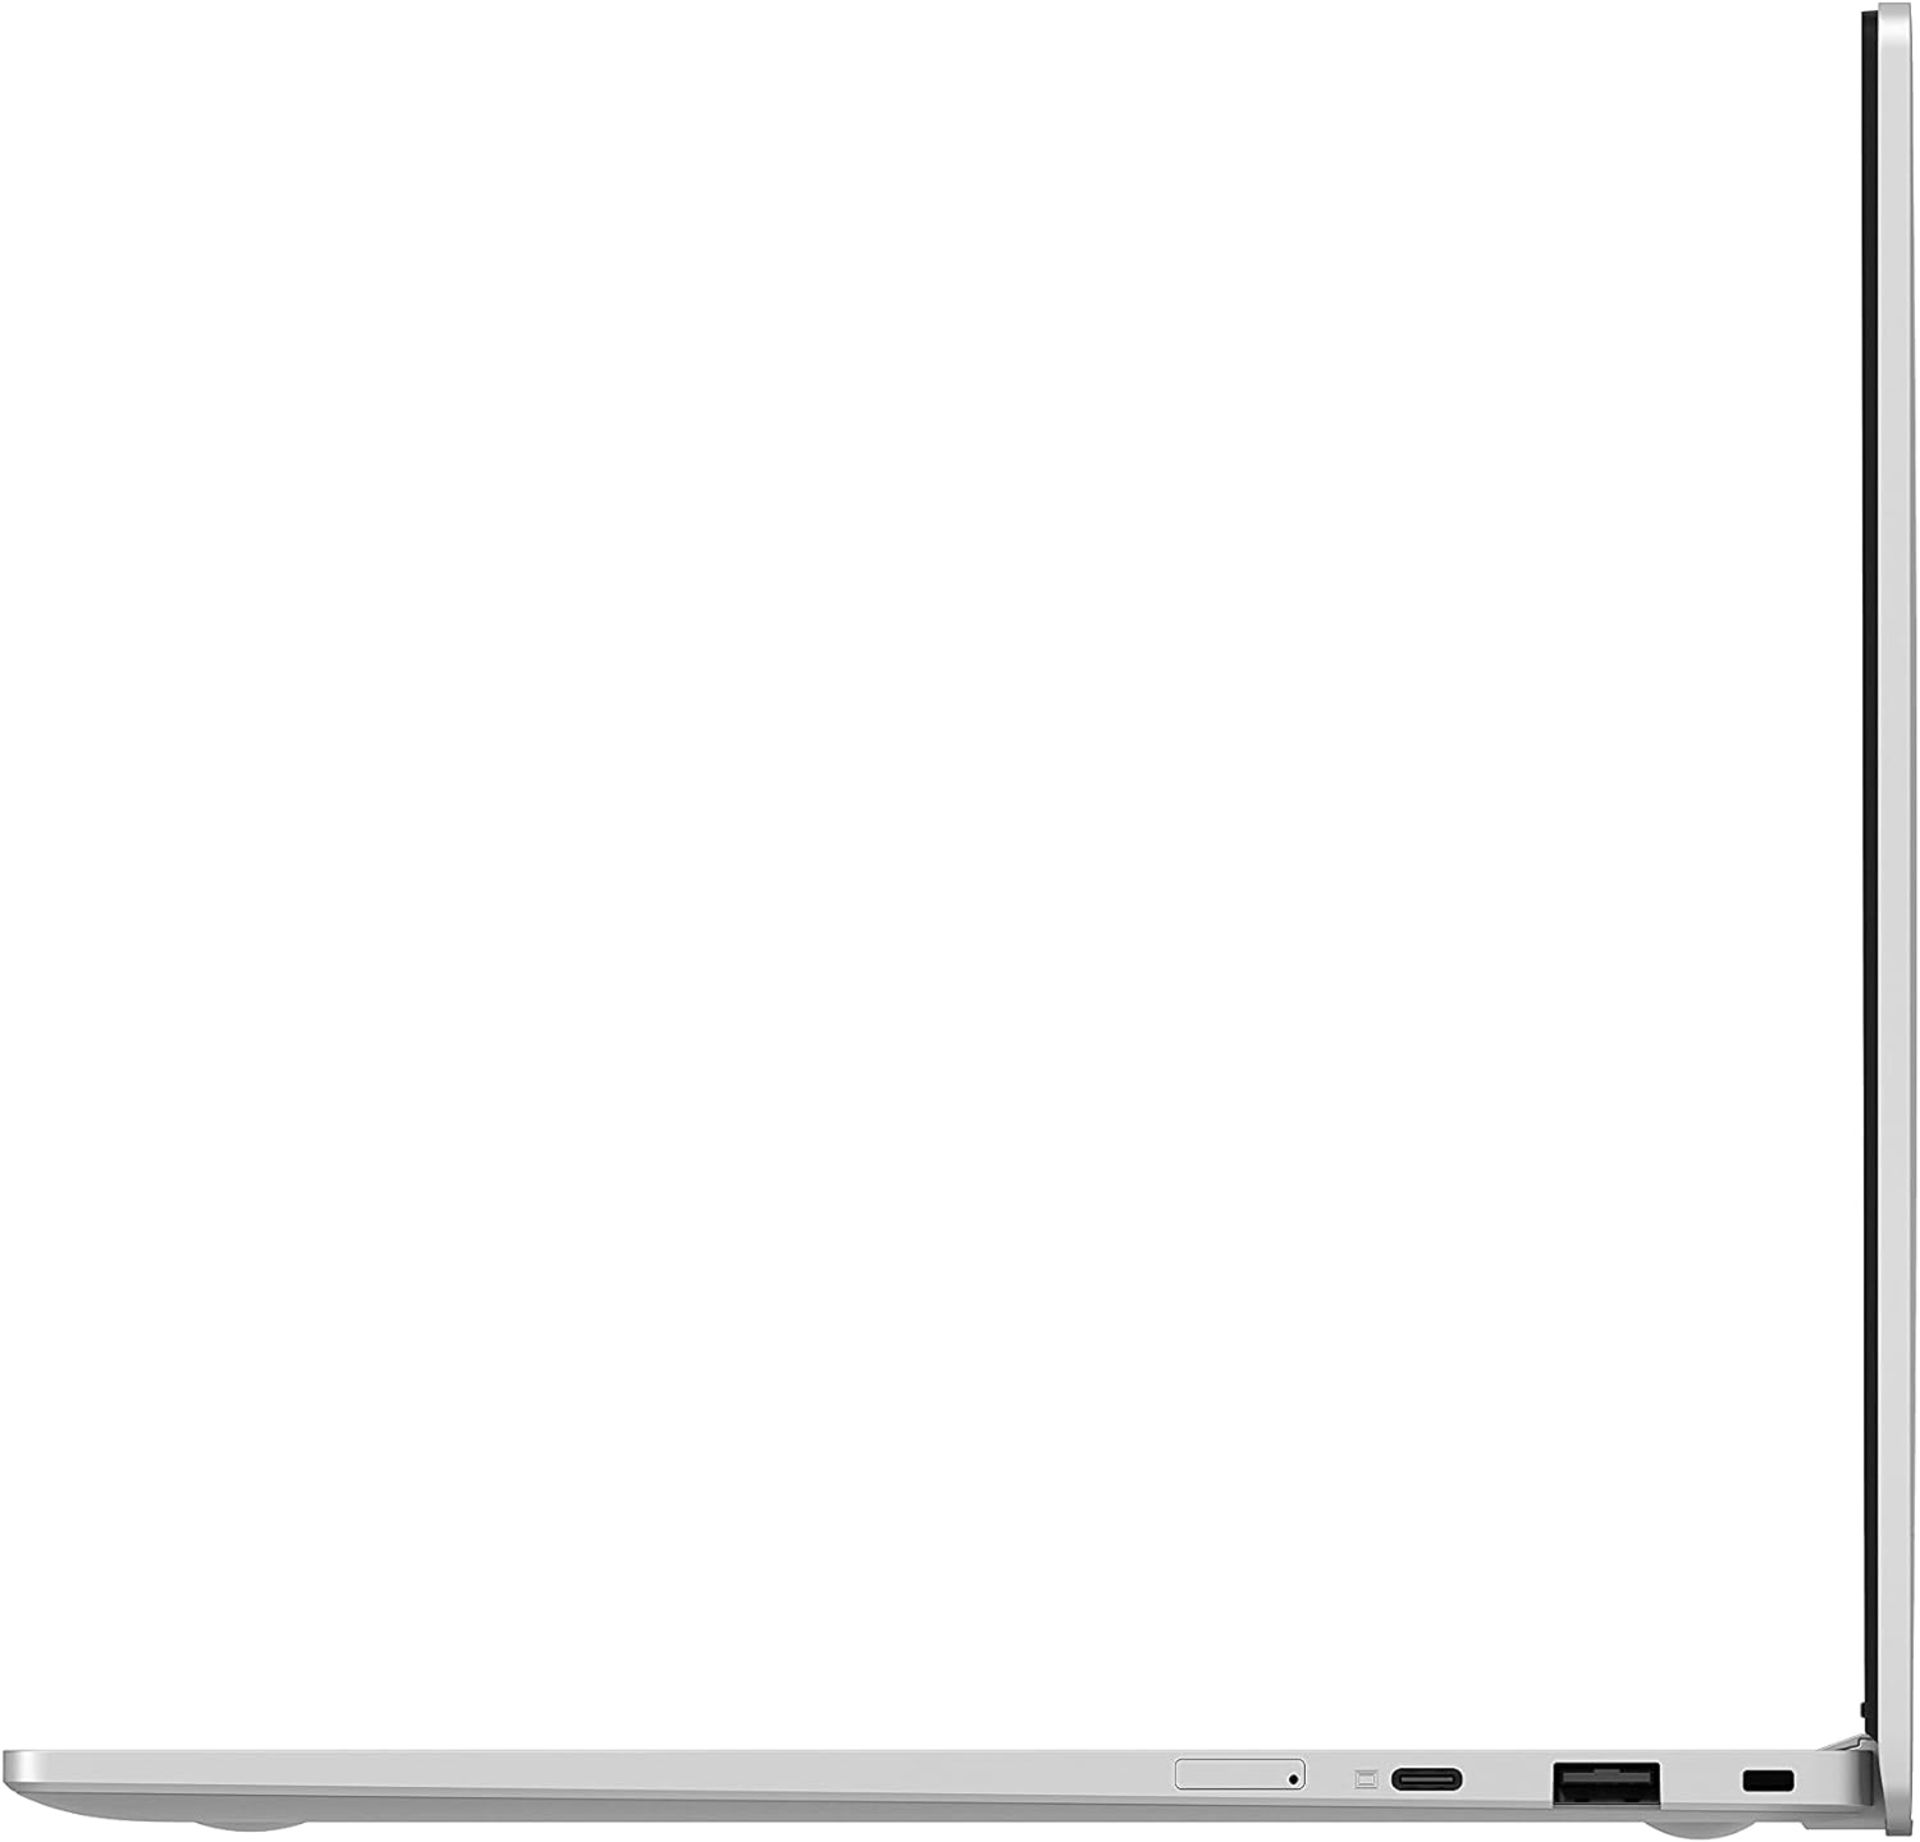 BRAND NEW FACTORY SEALED SAMSUNG Galaxy Book Go 345XLA-KB1 14 Inch Laptop. RRP £399. (CGE). - Image 2 of 7